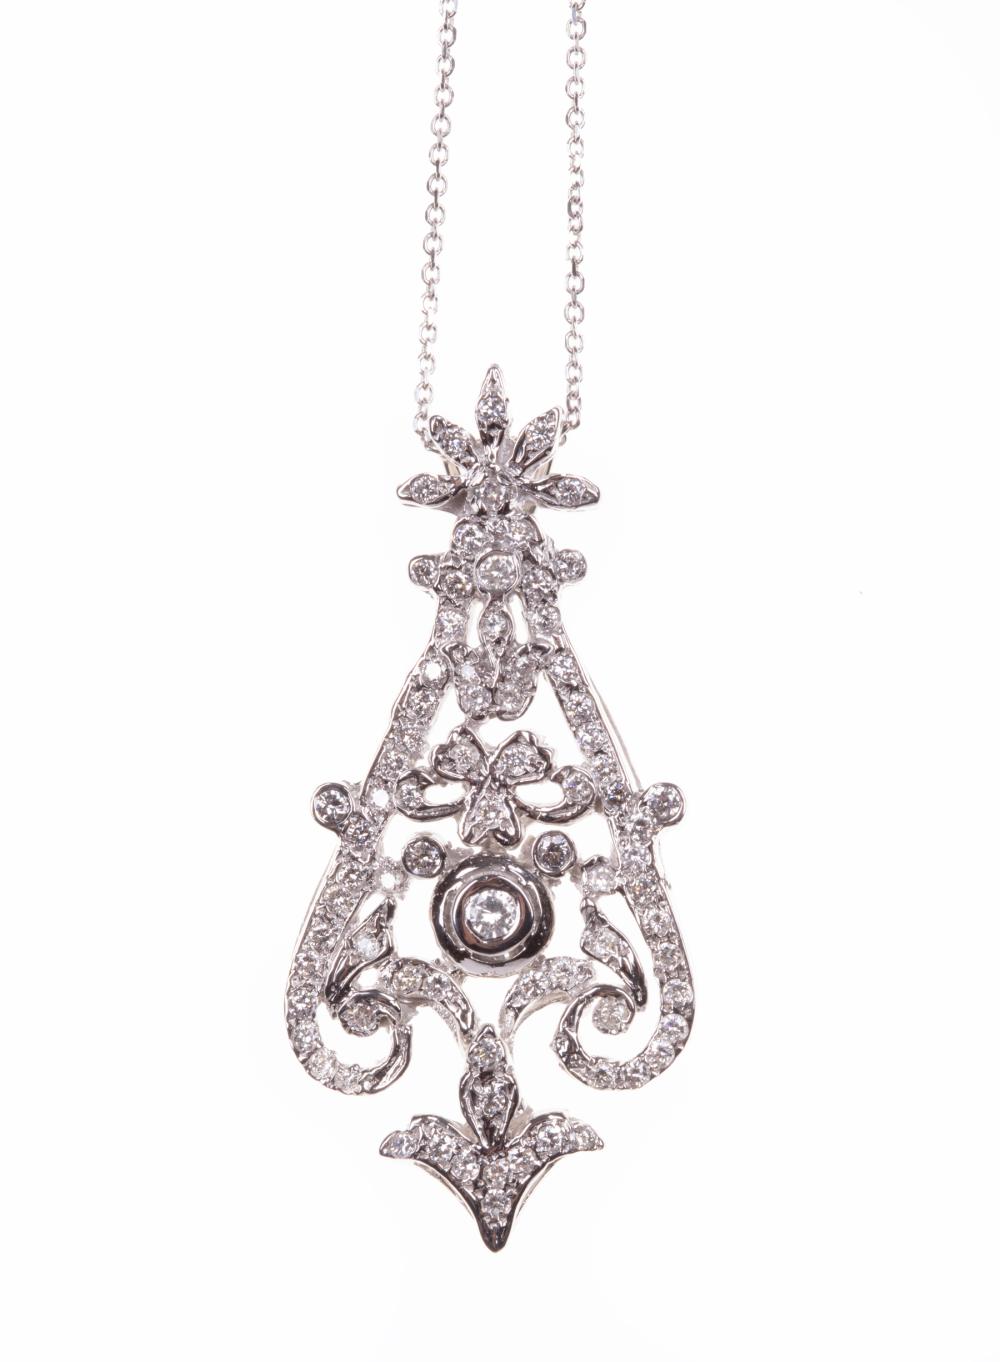 14 KT WHITE GOLD AND DIAMOND PENDANT 3182a6